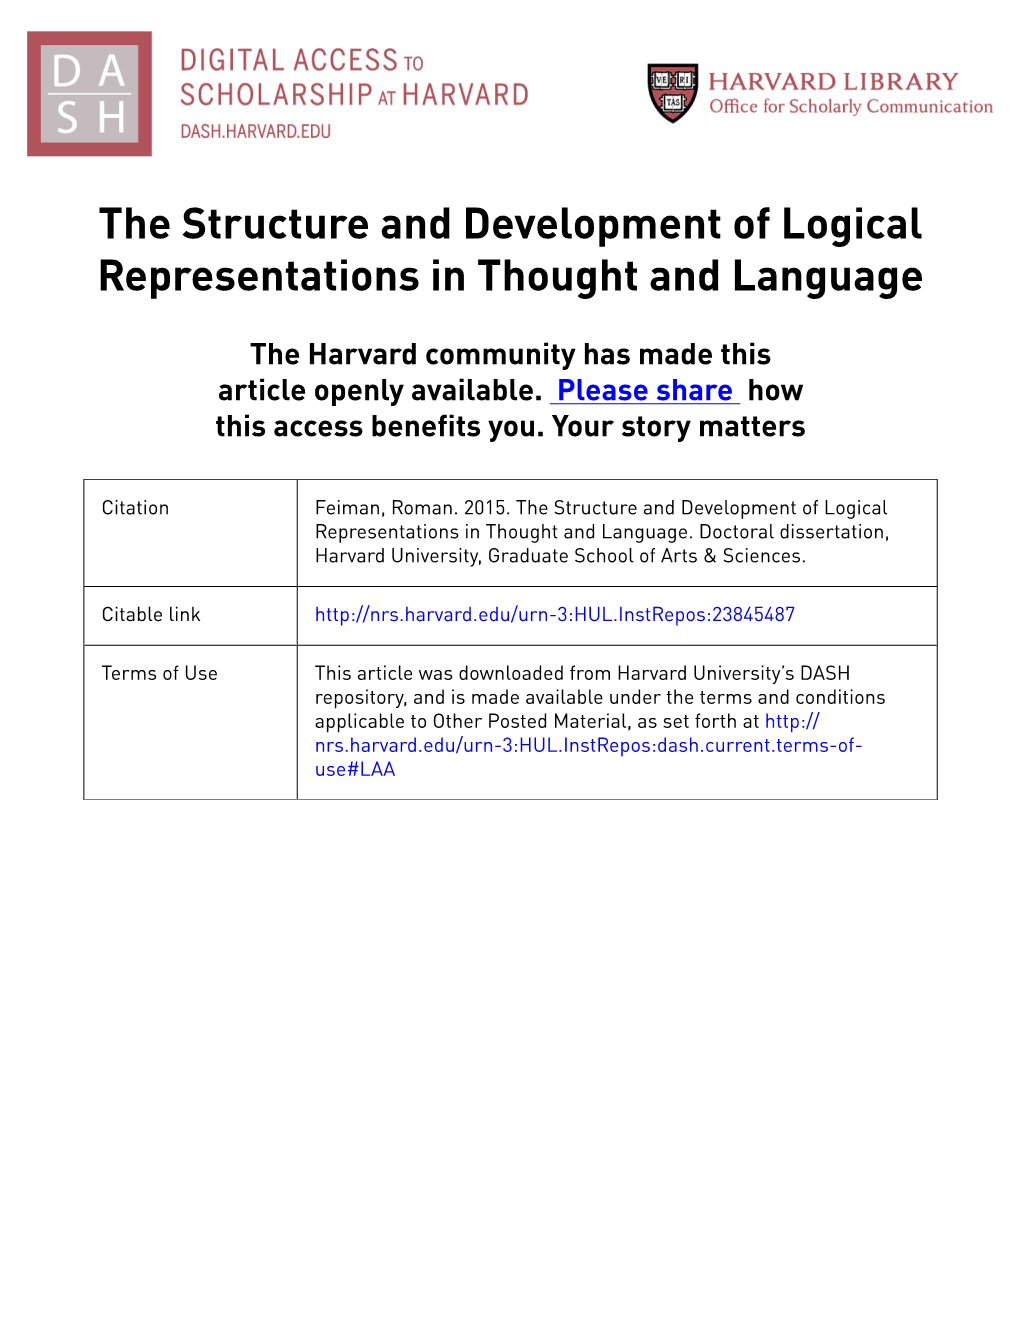 The Structure and Development of Logical Representations in Thought and Language